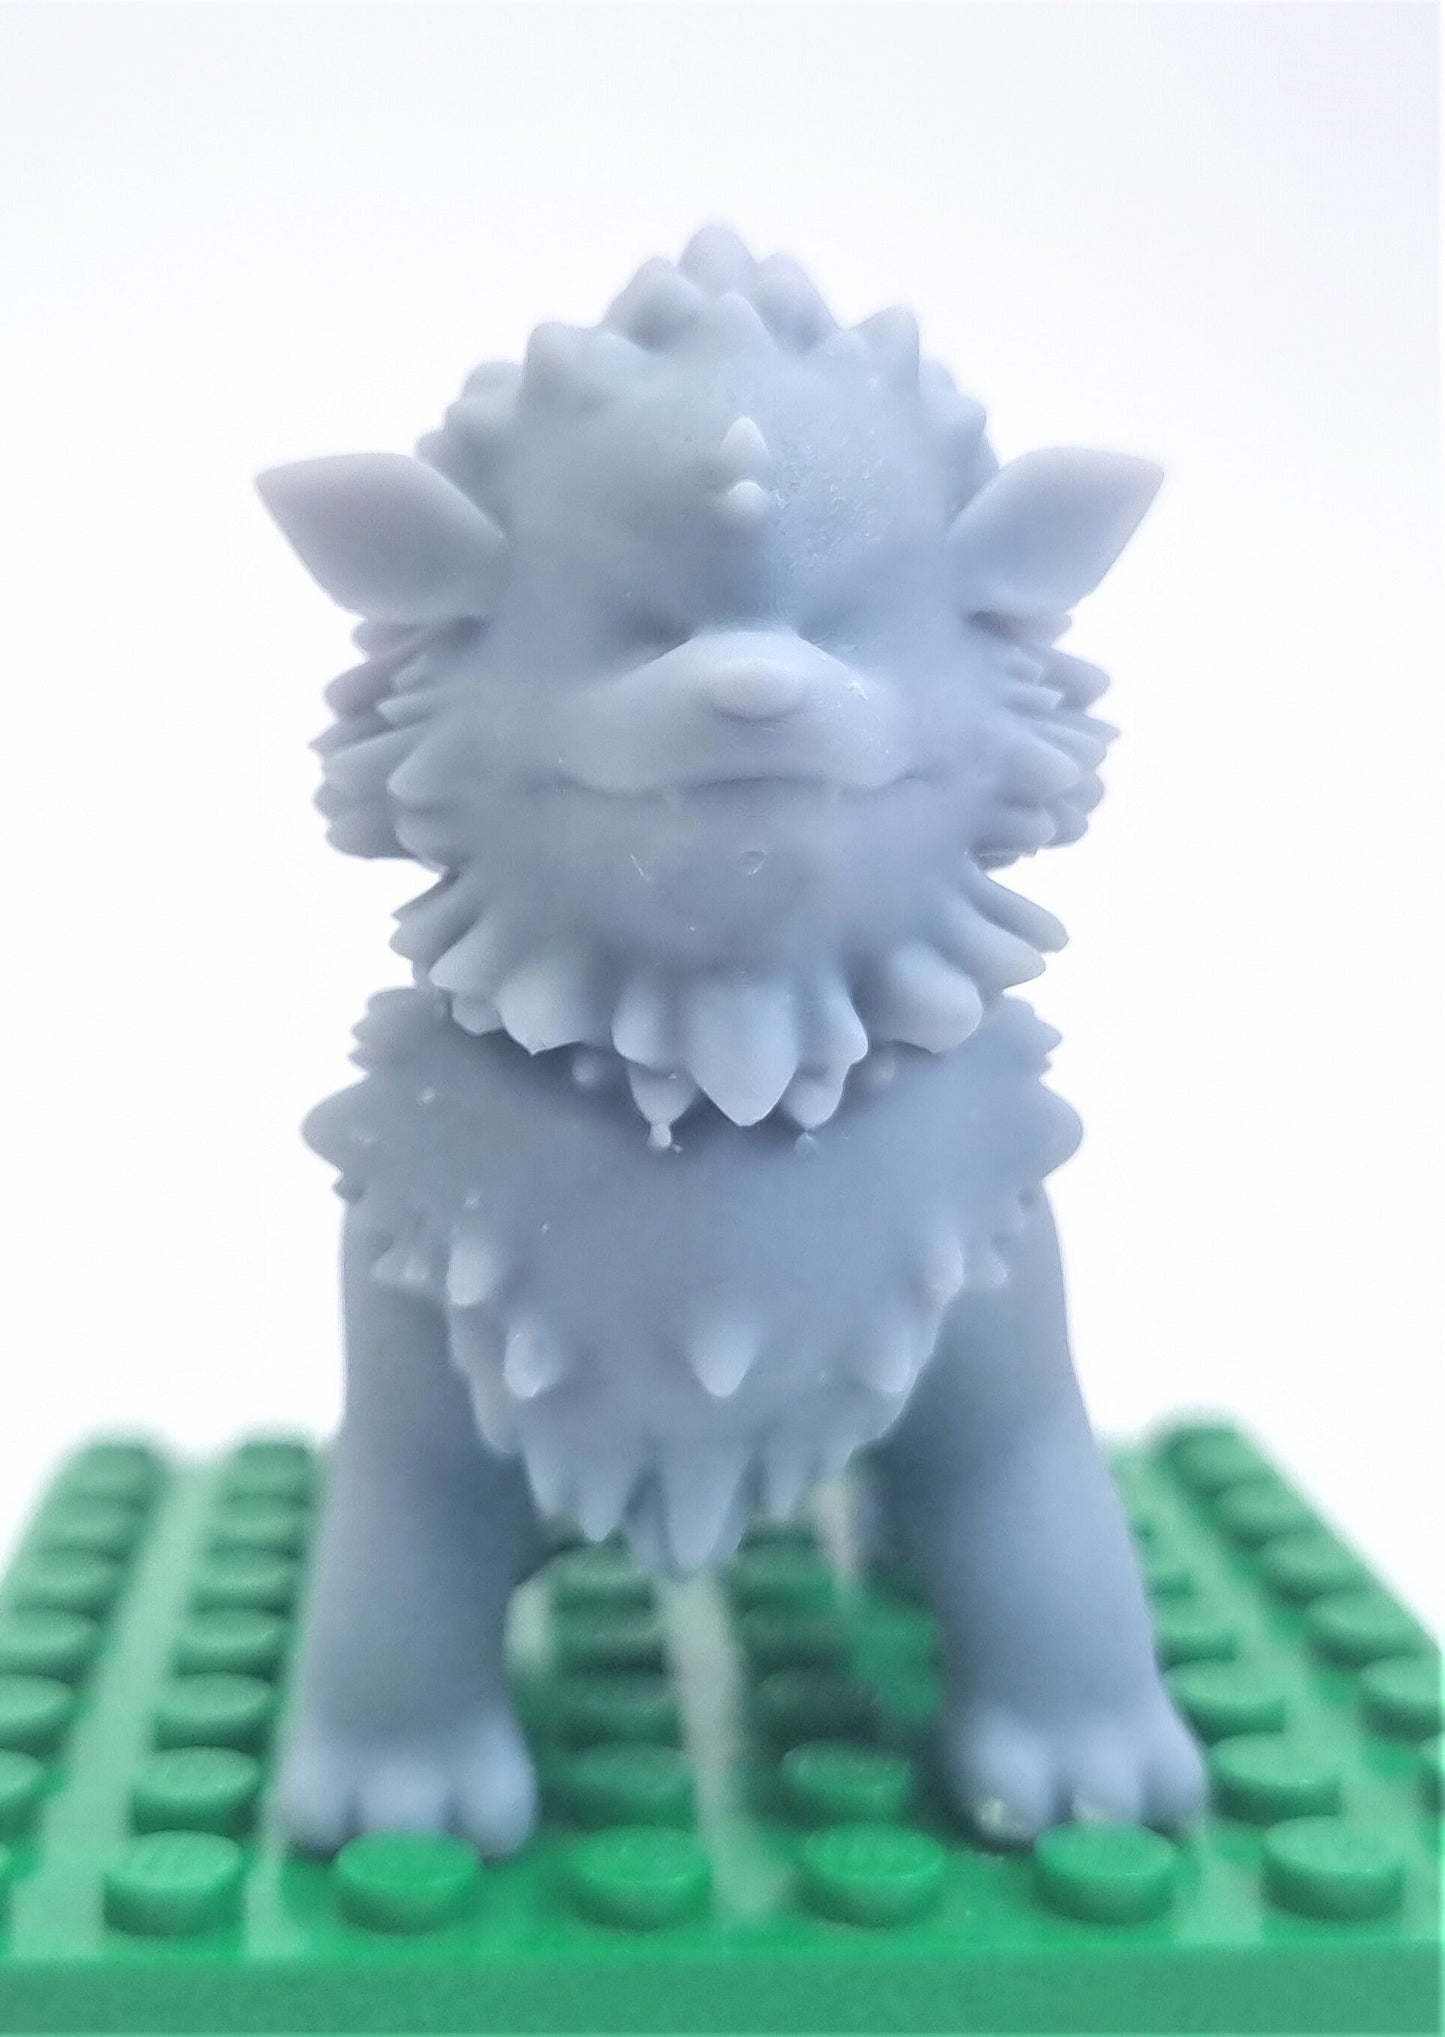 Building toy custom 3D printed fire wolve!